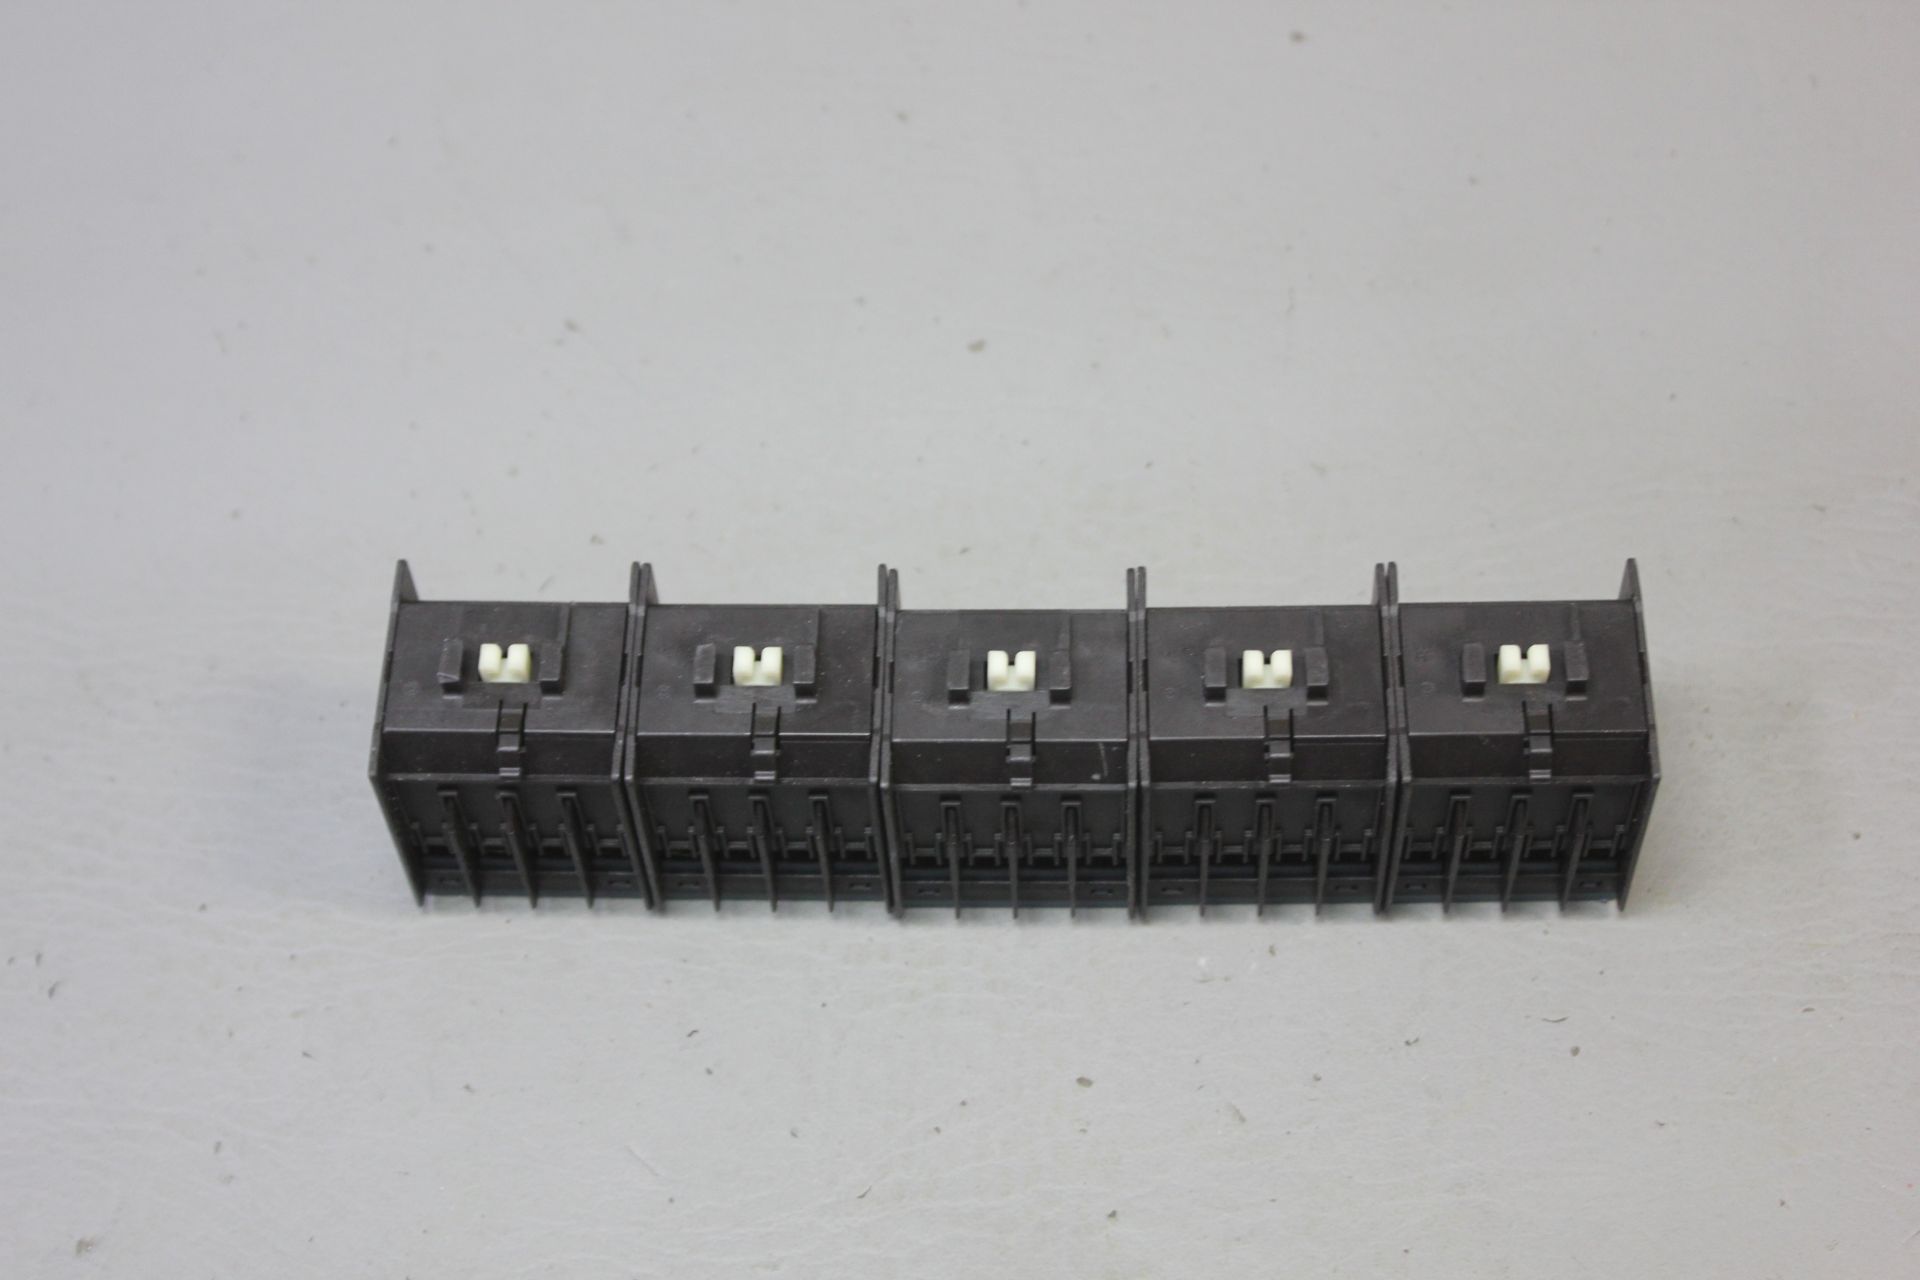 LOT OF 5 UNUSED SIEMENS CONTACTOR AUX SWITCHES - Image 2 of 4